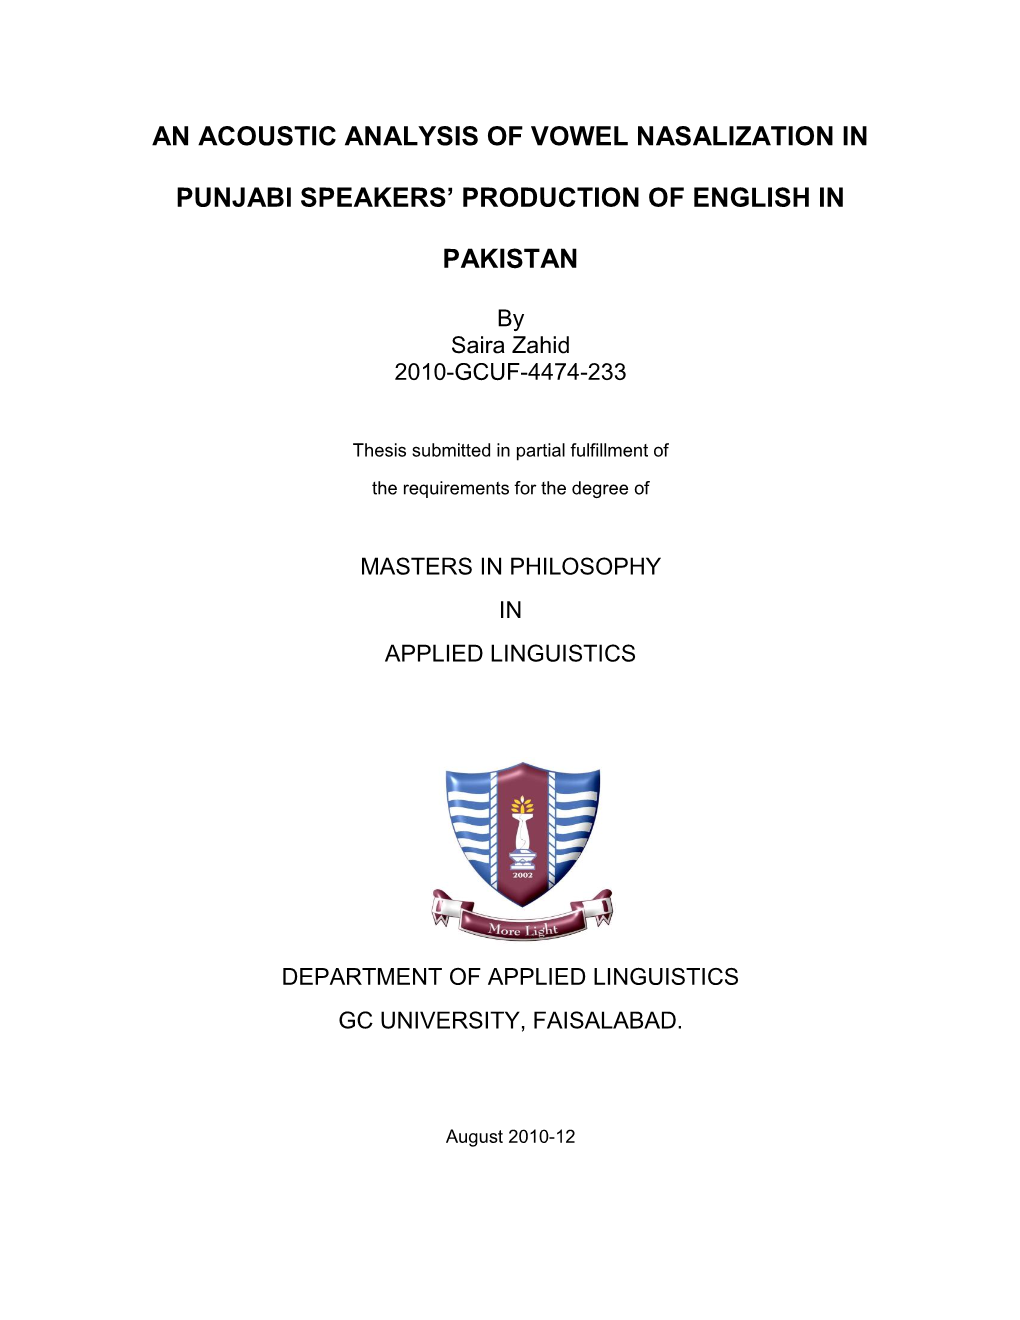 An Acoustic Analysis of Vowel Nasalization in Punjabi Speakers' Production of English in Pakistan